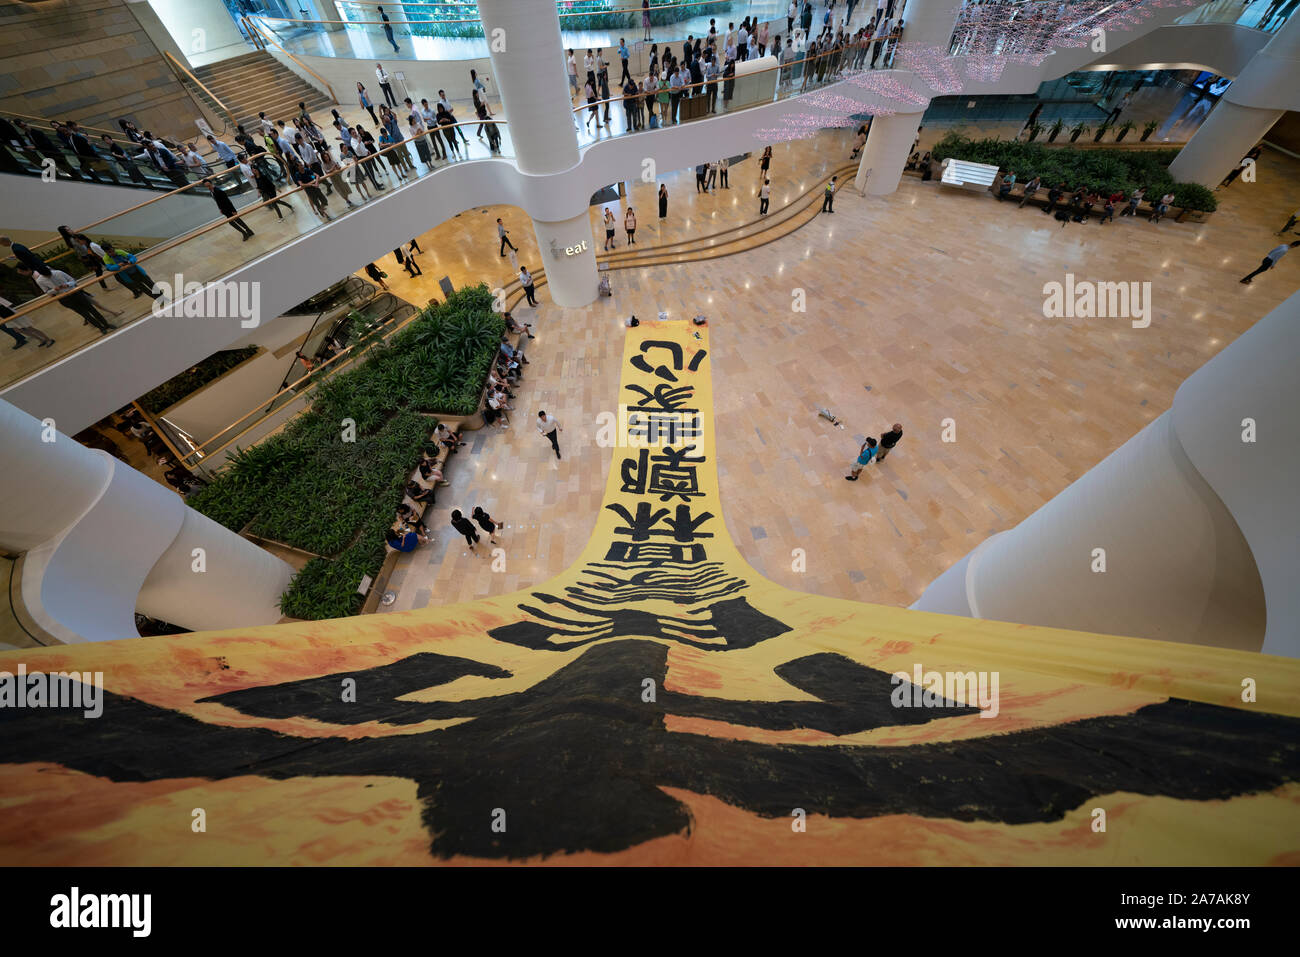 Pro Demokratie protestieren Banner in Pacific Place Shopping Mall in Hongkong Stockfoto